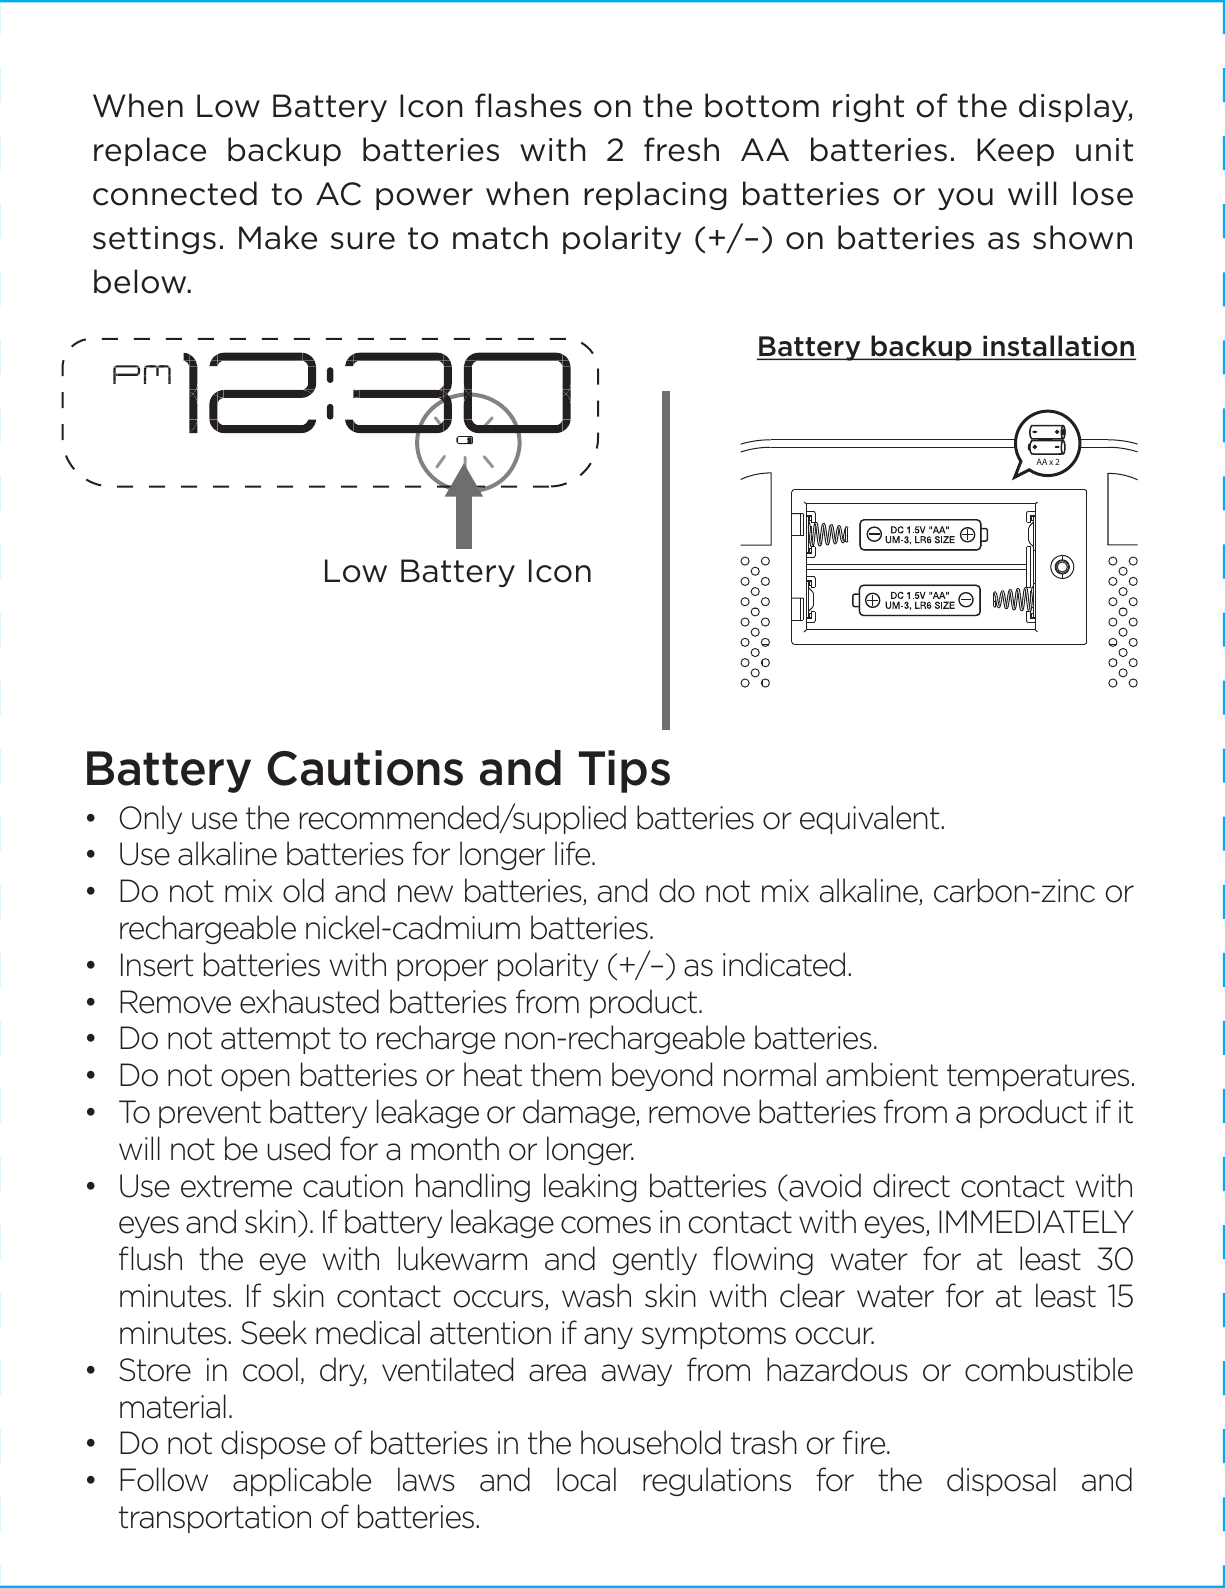 When Low Battery Icon ﬂashes on the bottom right of the display, replace backup batteries with 2 fresh AA batteries. Keep unit connected to AC power when replacing batteries or you will lose settings. Make sure to match polarity (+/–) on batteries as shown below. Battery Cautions and Tips •   Only use the recommended/supplied batteries or equivalent.•   Use alkaline batteries for longer life.•   Do not mix old and new batteries, and do not mix alkaline, carbon-zinc or rechargeable nickel-cadmium batteries.•   Insert batteries with proper polarity (+/–) as indicated.•  Remove exhausted batteries from product.•  Do not attempt to recharge non-rechargeable batteries.•  Do not open batteries or heat them beyond normal ambient temperatures.•  To prevent battery leakage or damage, remove batteries from a product if it will not be used for a month or longer.•  Use extreme caution handling leaking batteries (avoid direct contact with eyes and skin). If battery leakage comes in contact with eyes, IMMEDIATELY ﬂush the eye with lukewarm and gently ﬂowing water for at least 30 minutes. If skin contact occurs, wash skin with clear water for at least 15 minutes. Seek medical attention if any symptoms occur.•  Store in cool, dry, ventilated area away from hazardous or combustible material.•   Do not dispose of batteries in the household trash or ﬁre.•  Follow applicable laws and local regulations for the disposal and transportation of batteries.Battery backup installationLow Battery IconAA x 2